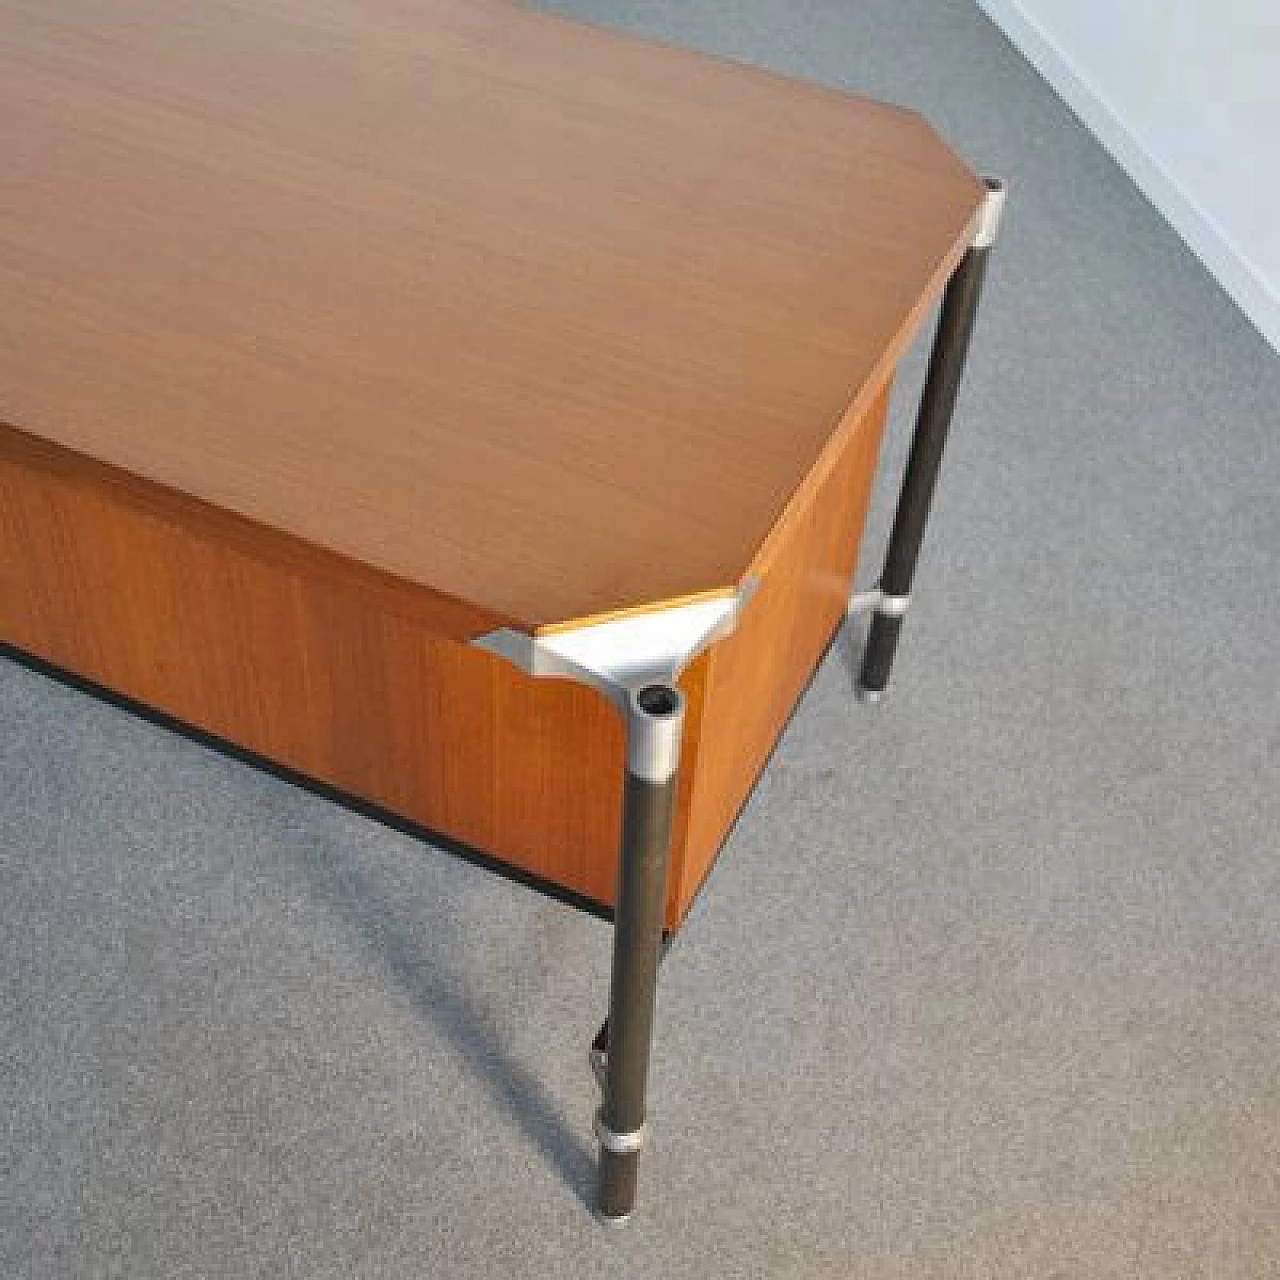 Executive desk by Ico Parisi for MIM Rome, 1950s 1412248